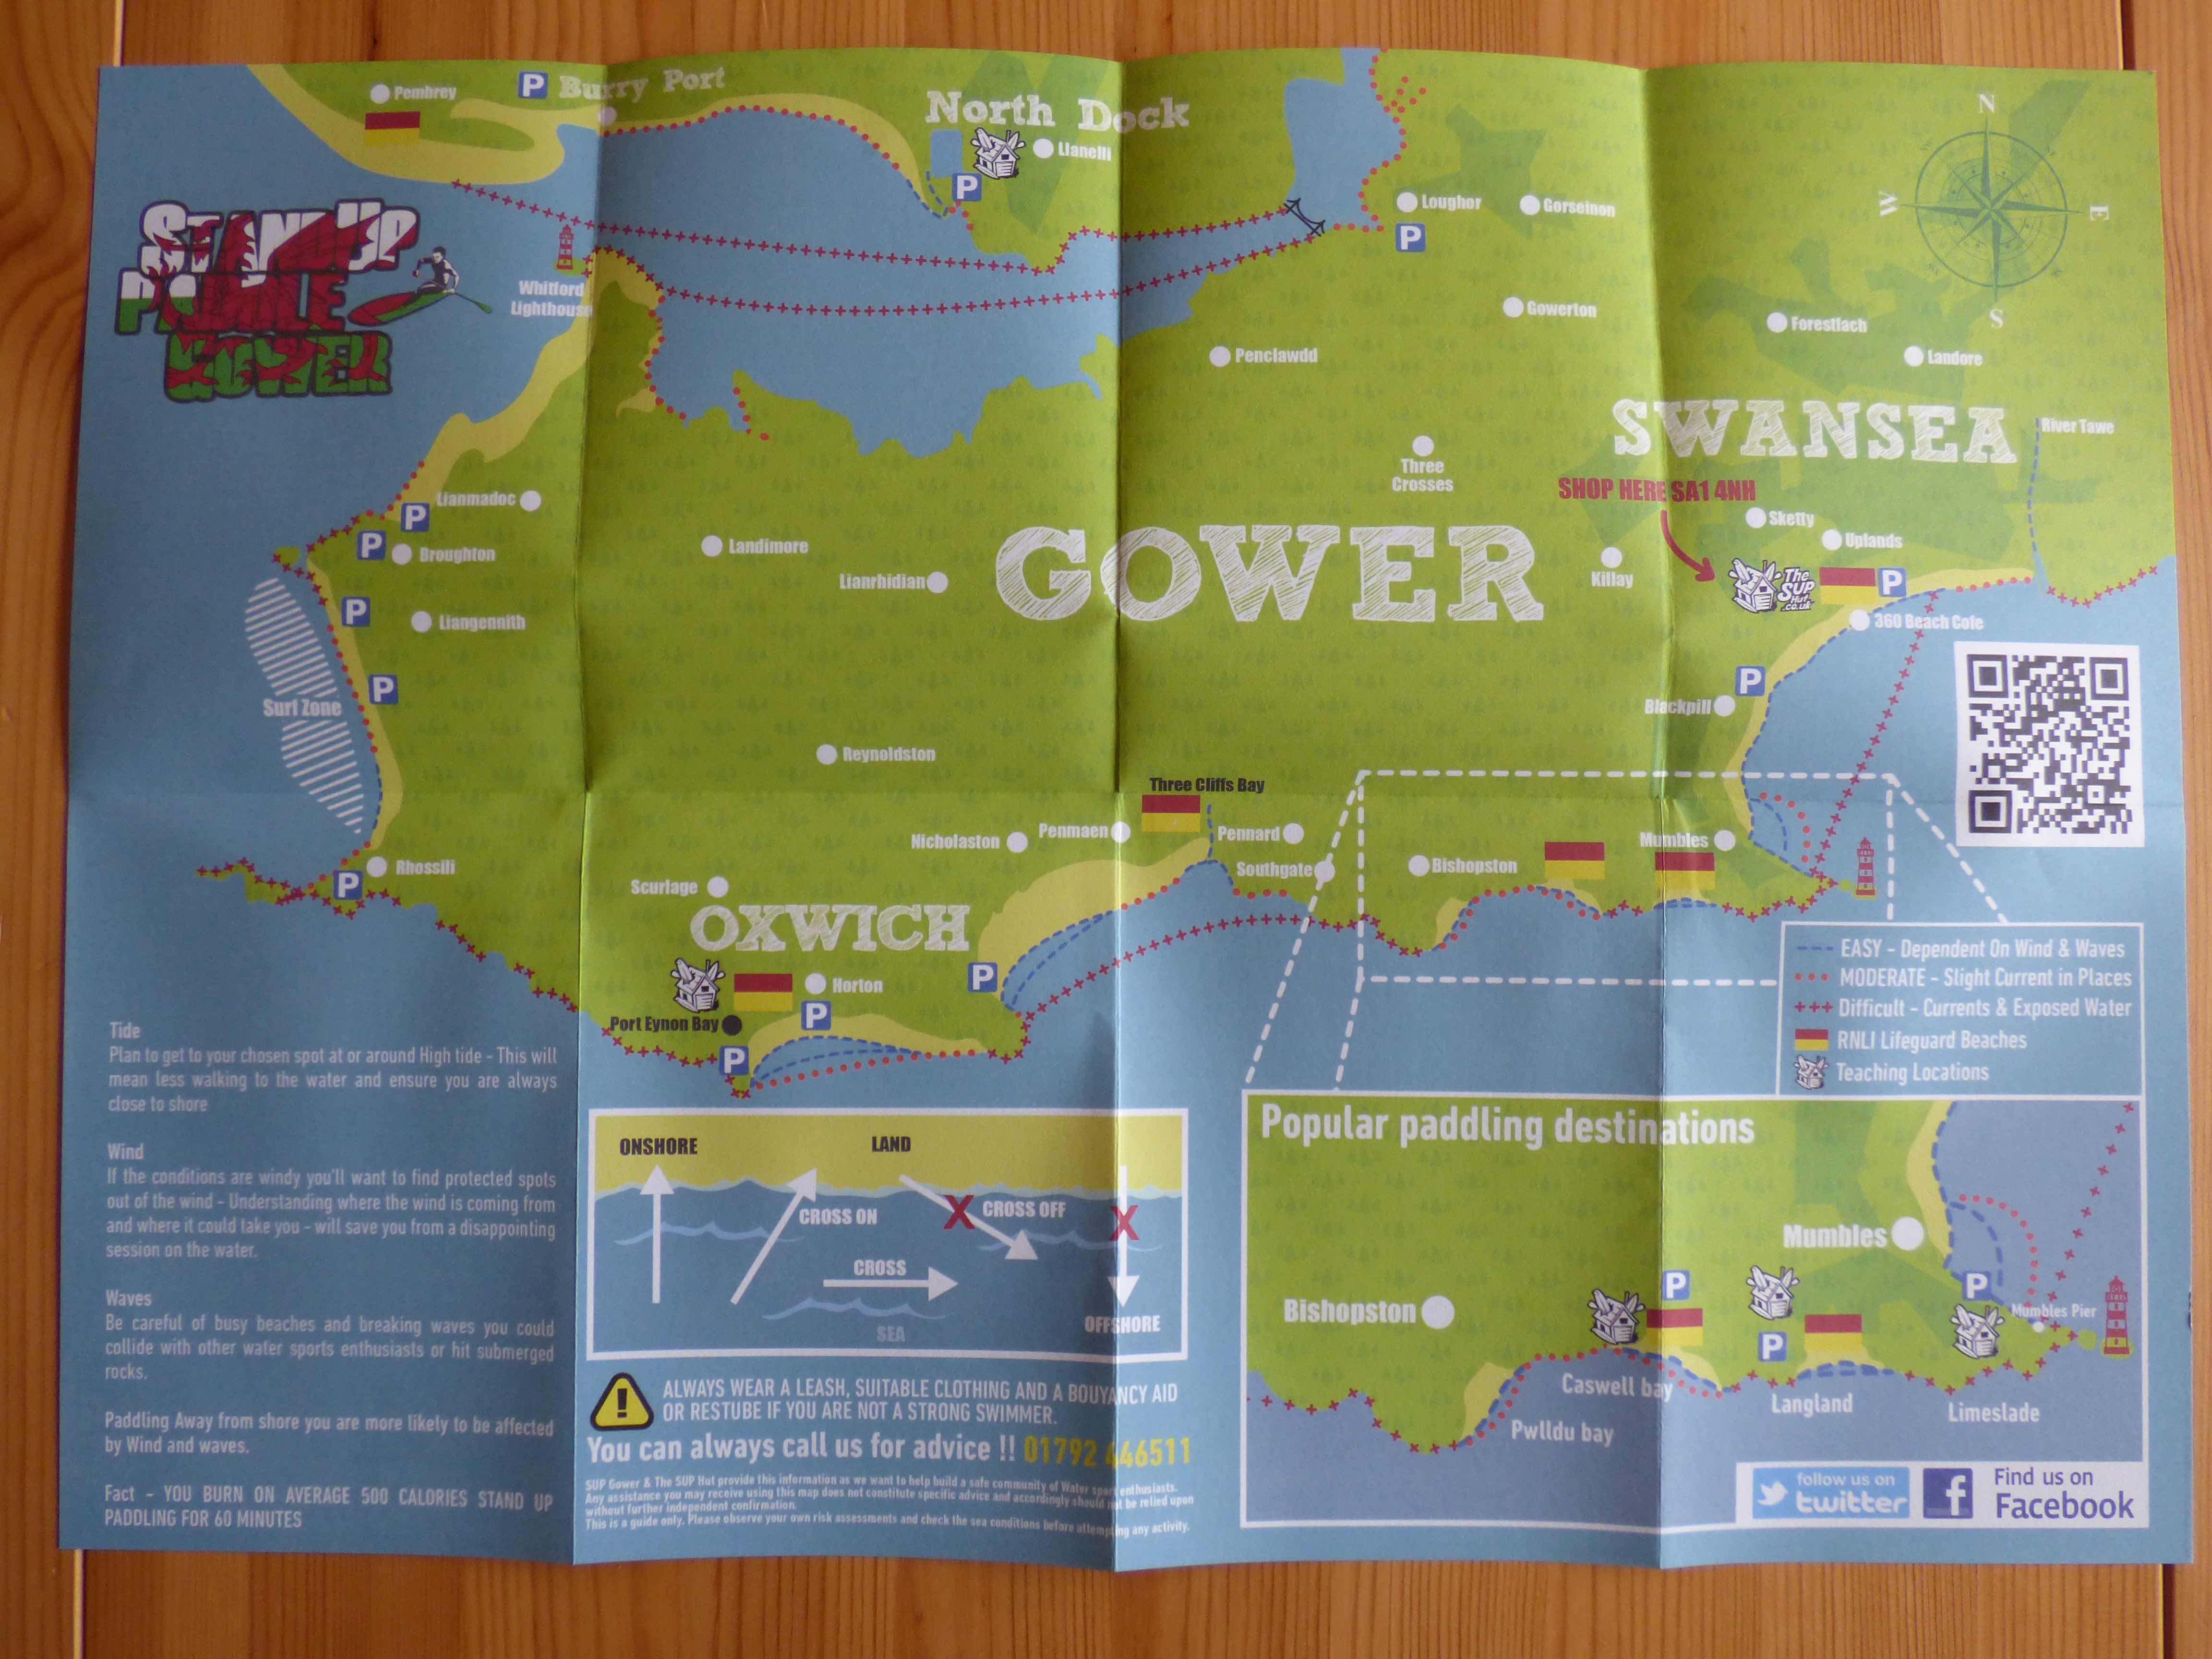 SUP Gower Guide